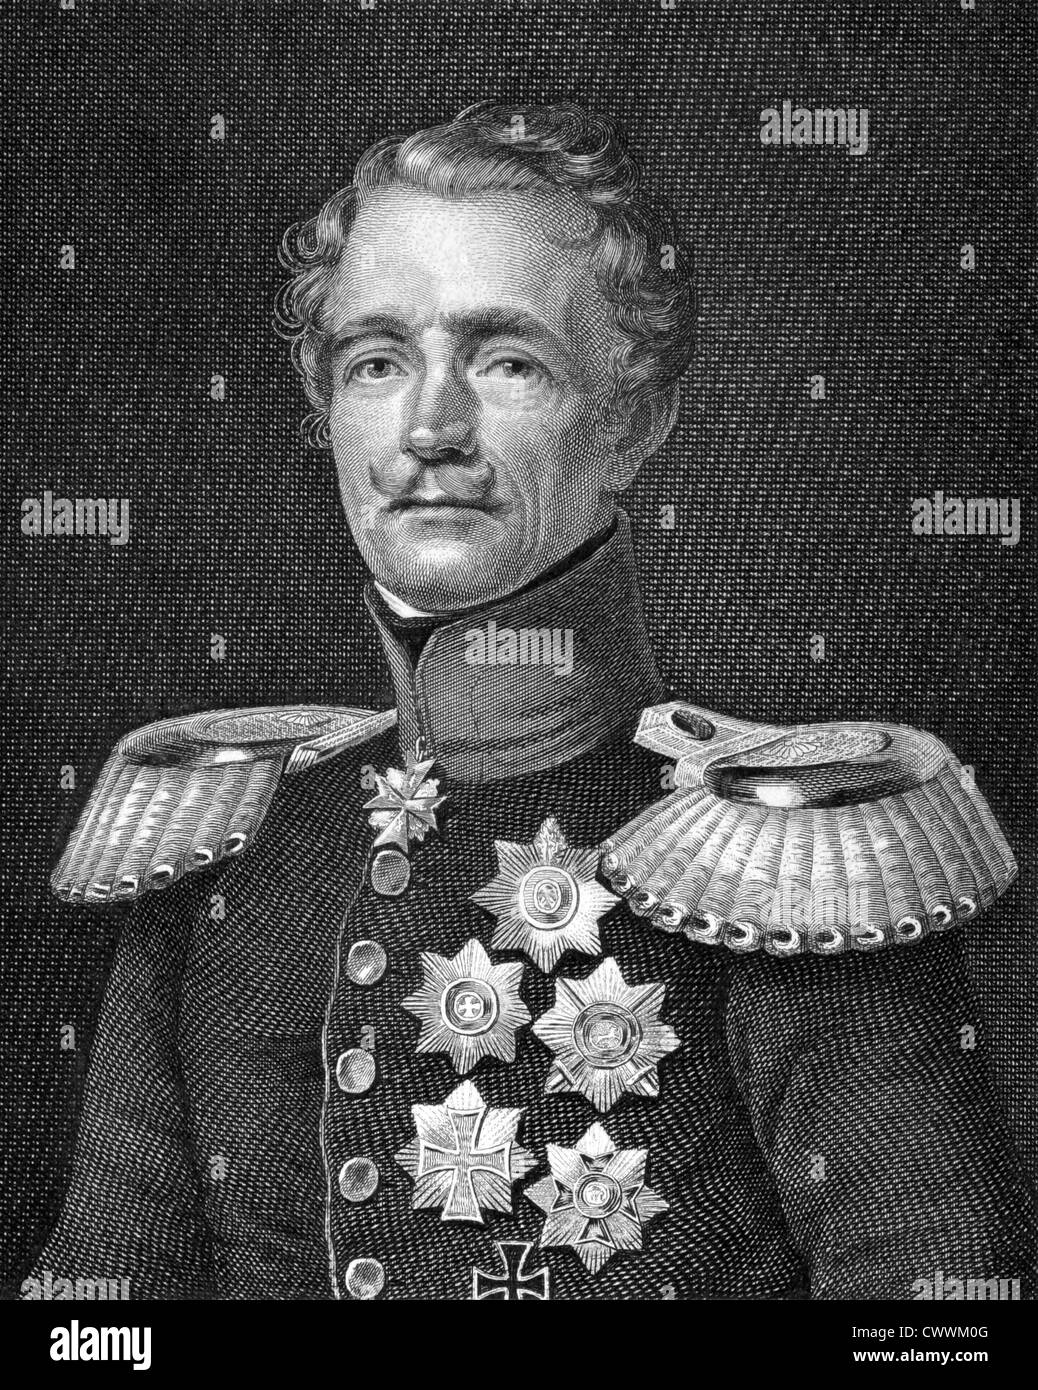 Friedrich Graf von Wrangel (1784-1877) on engraving from 1859. General feld marschall of the Prussian Army. Stock Photo